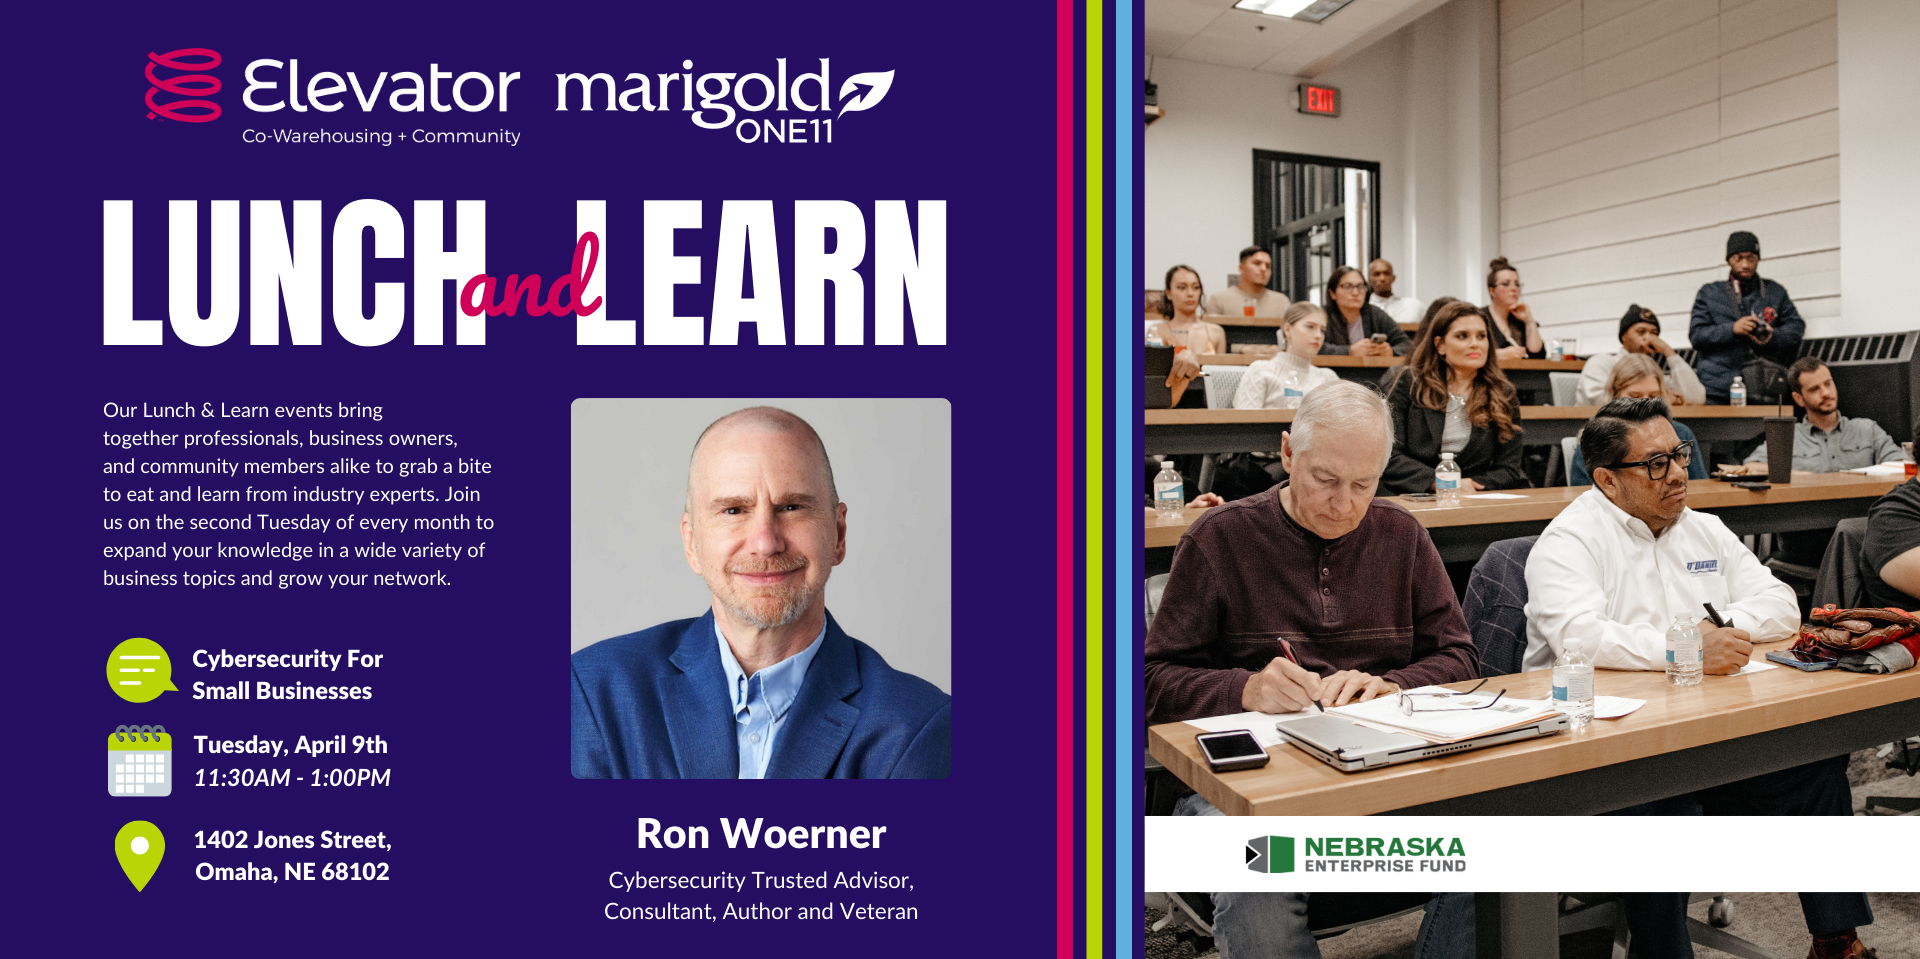 Marigold Lunch & Learn | Cybersecurity for Small Businesses w/ Ron Woerner promotional image